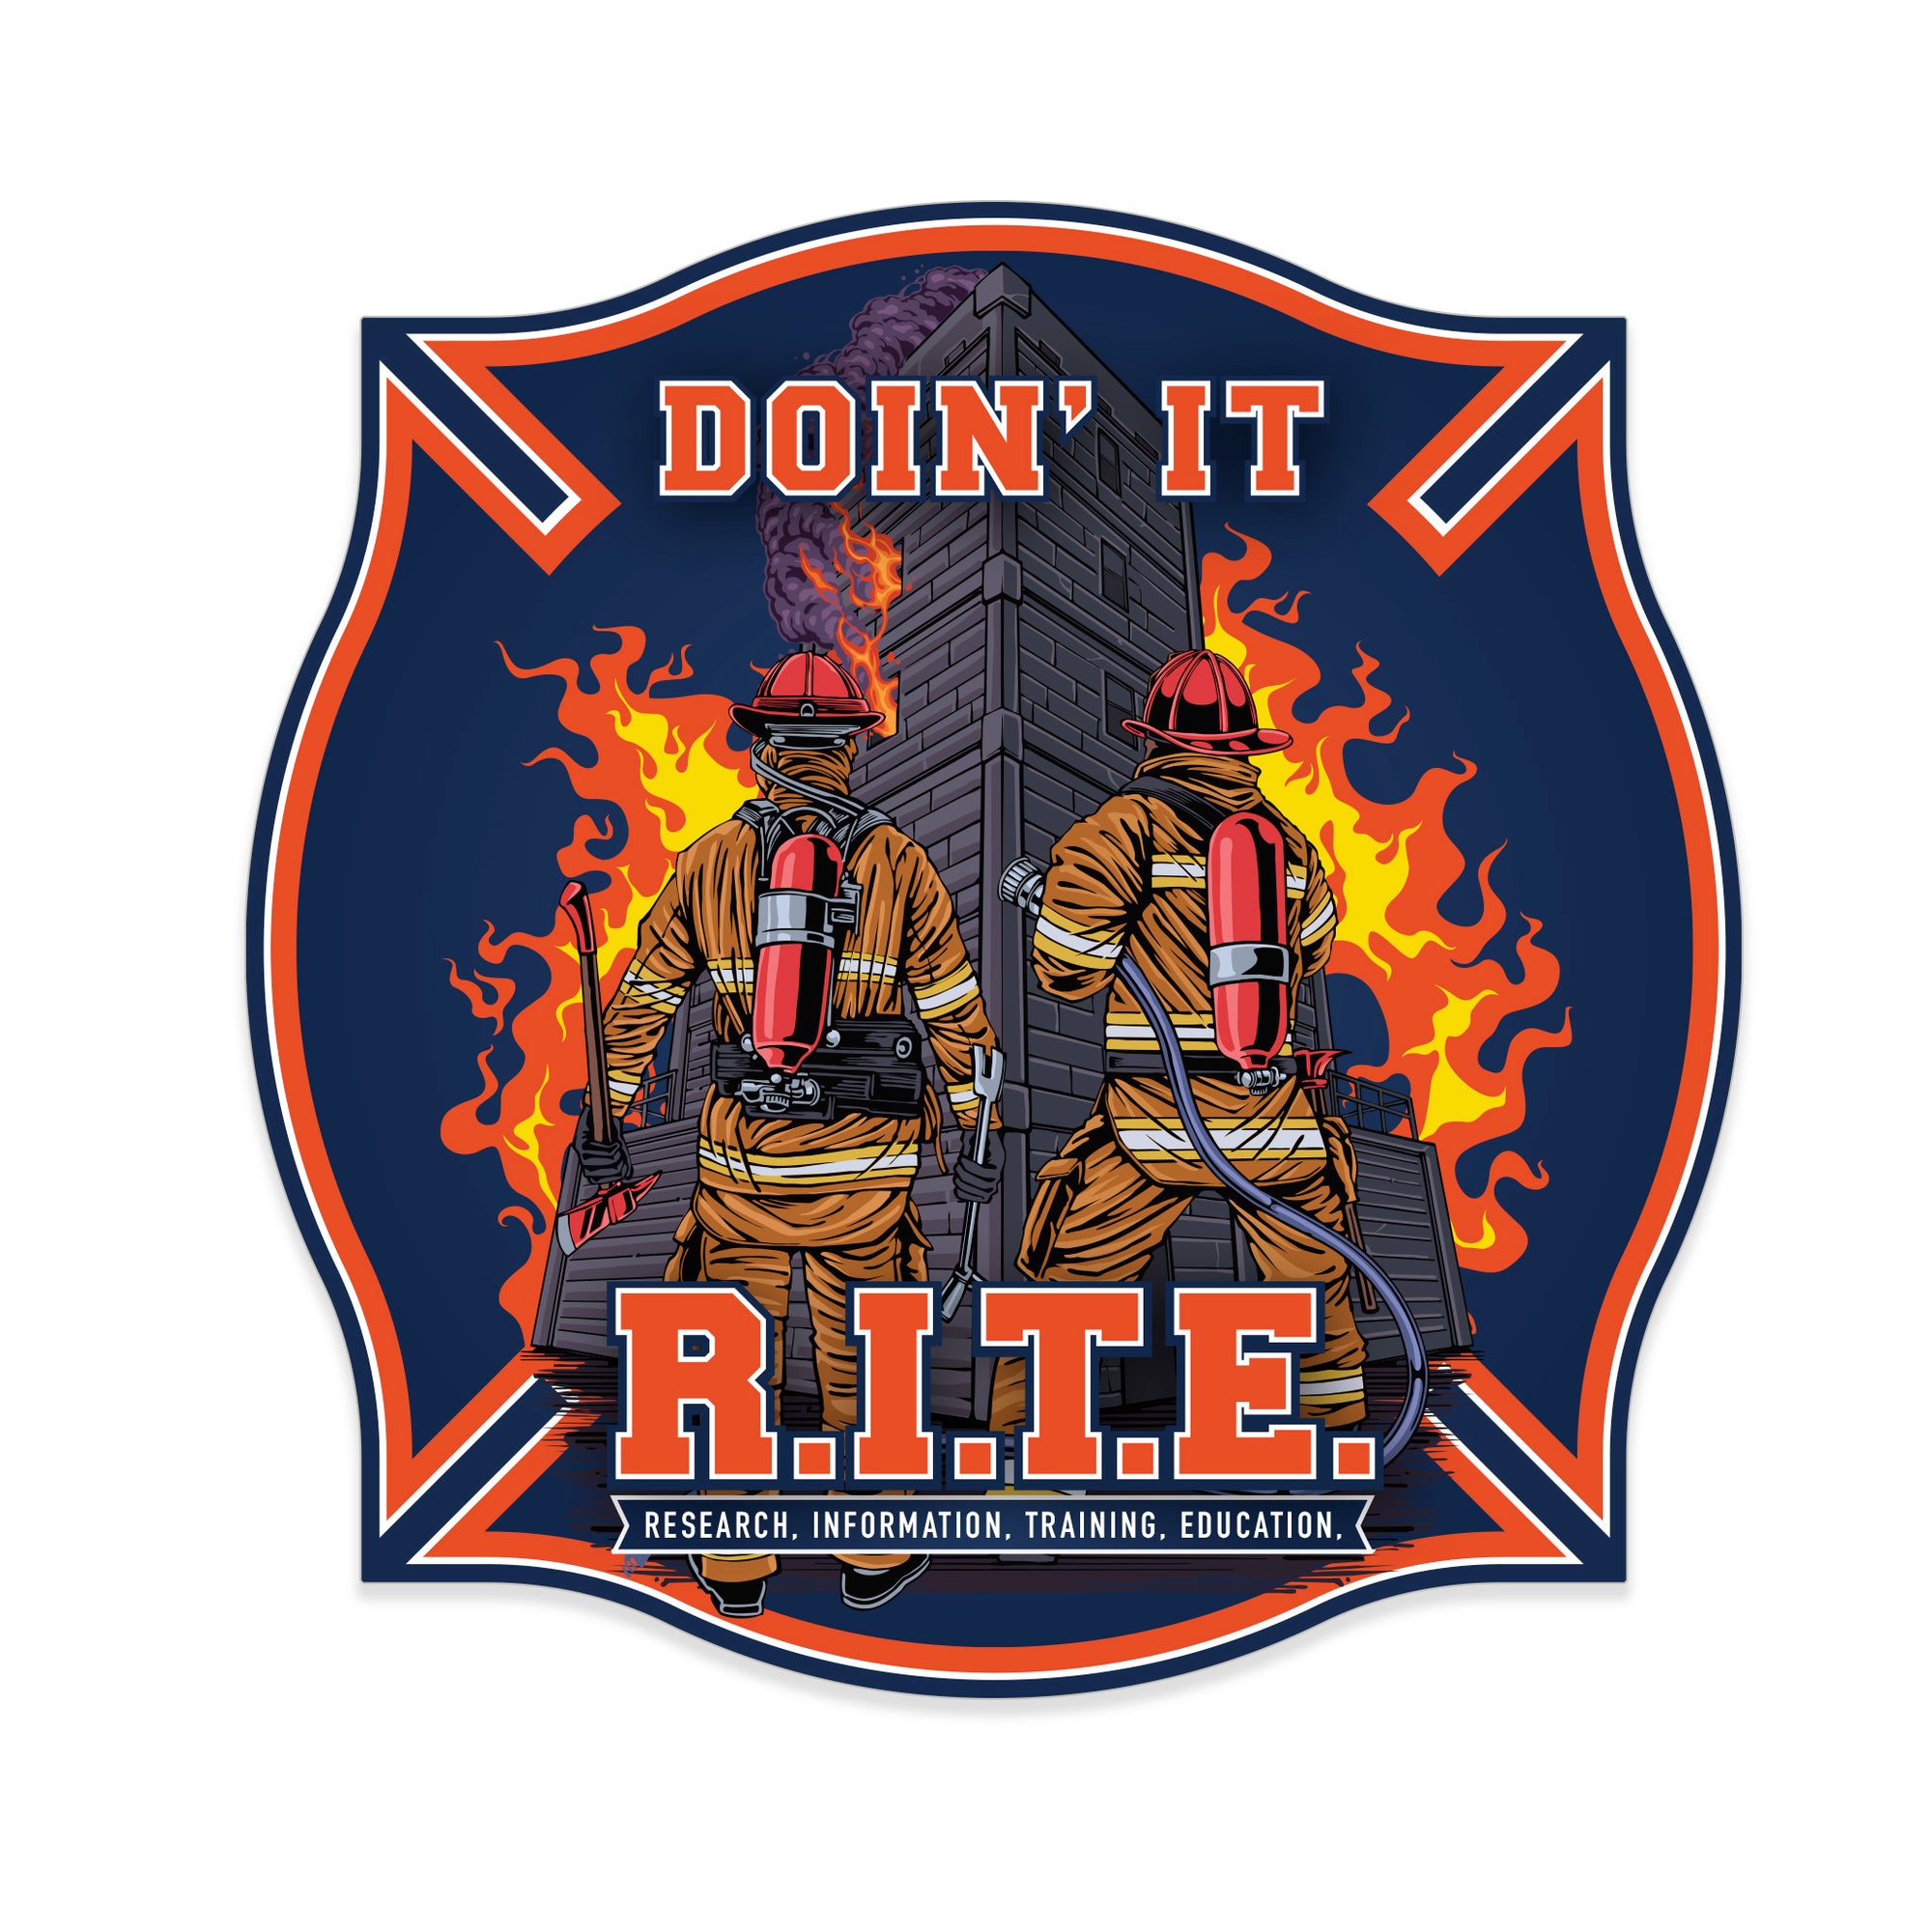 Firefighters in front of a burning building with text that reads DOIN' IT R.I.T.E. RESEARCH, INFORMATION, TRAINING, EDUCATION